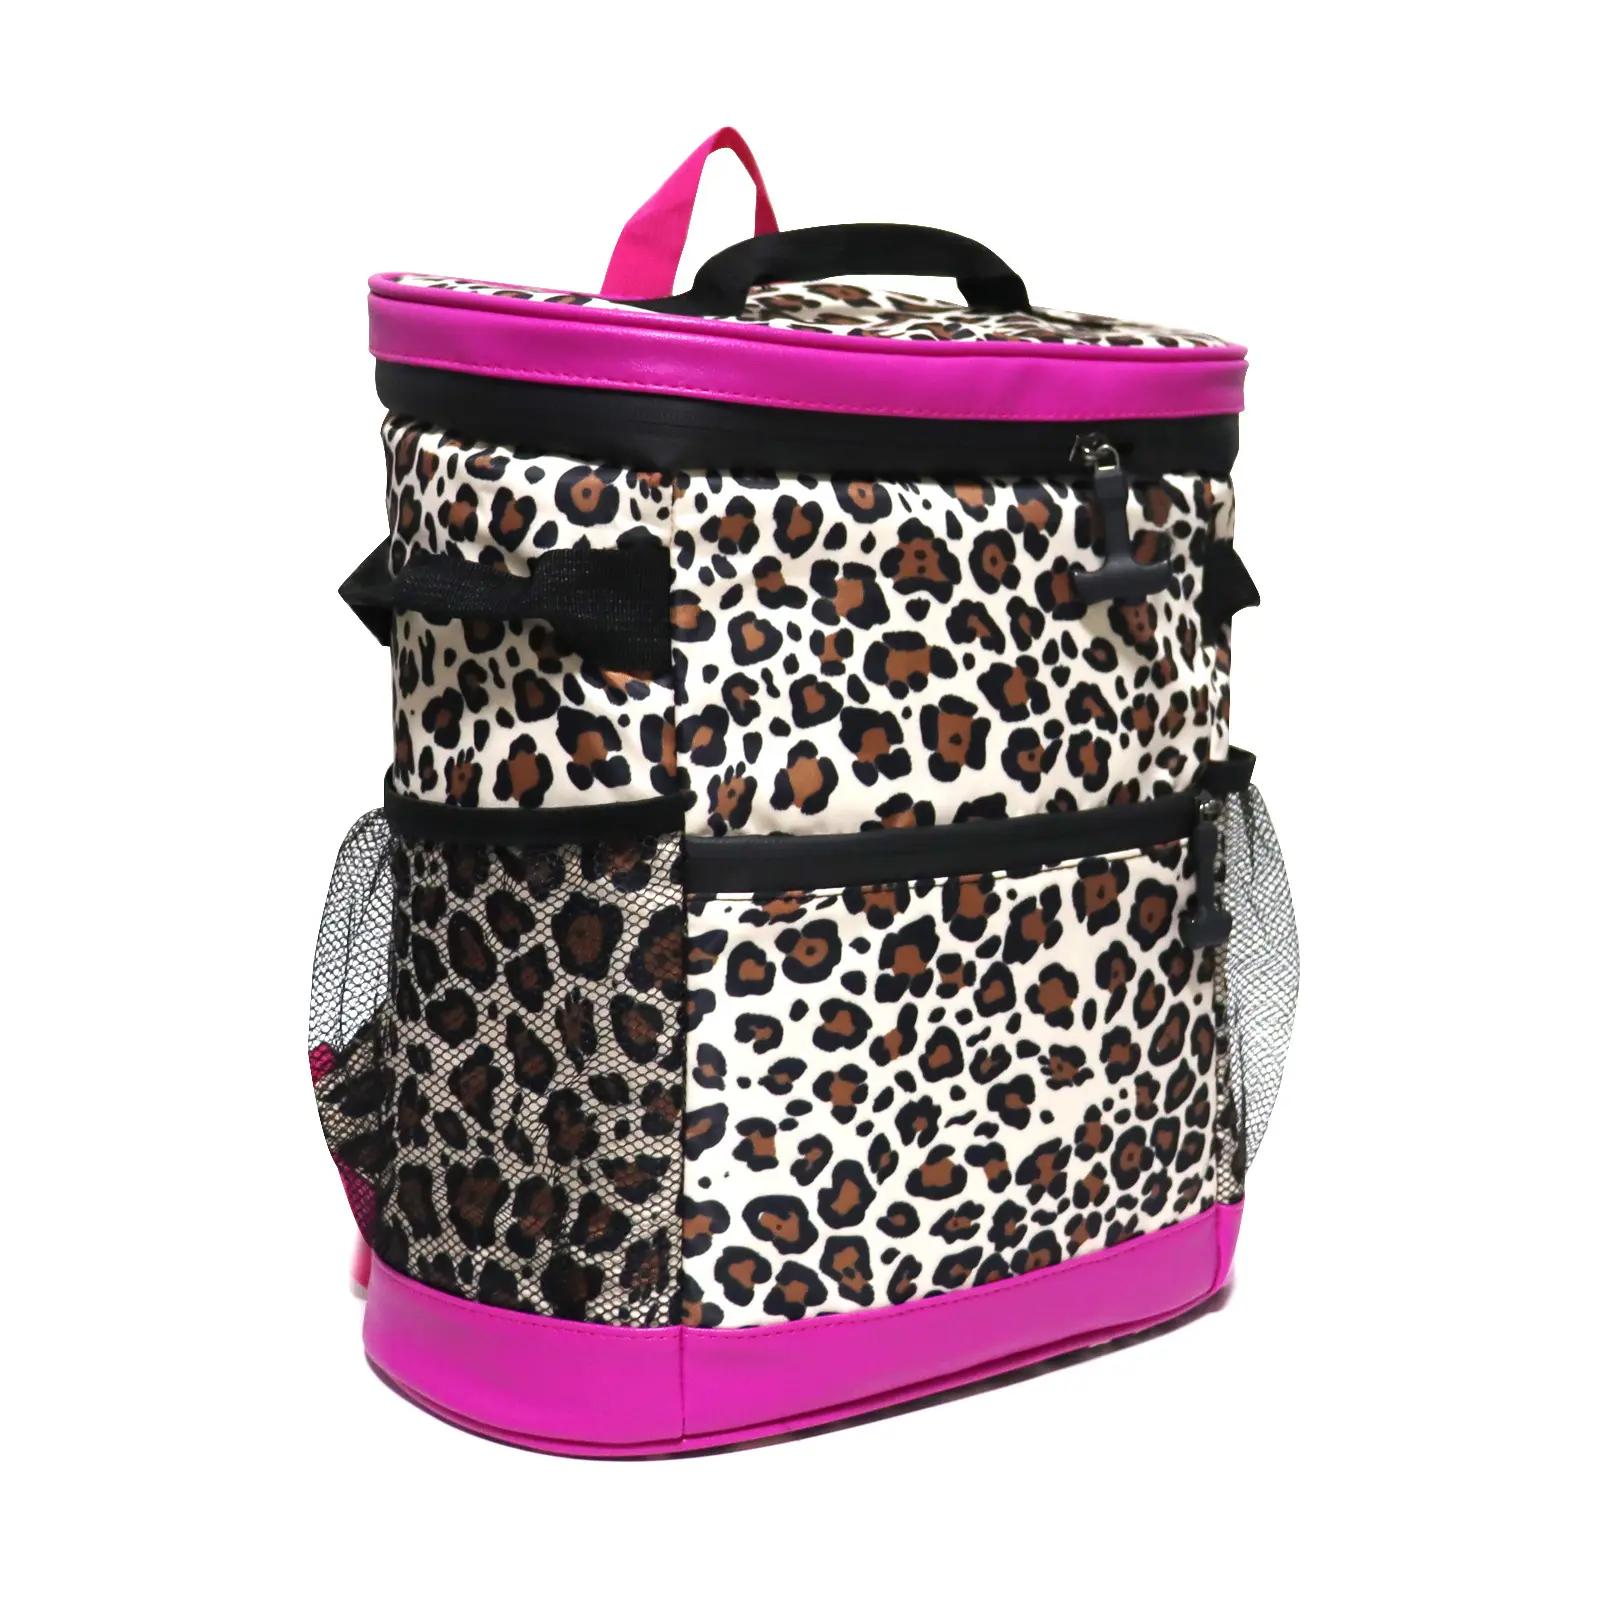 2023 insulated outdoor picnic travel large capacity handbag Leopard lunch Bag Fruit and vegetable backpack Refrigerated bag